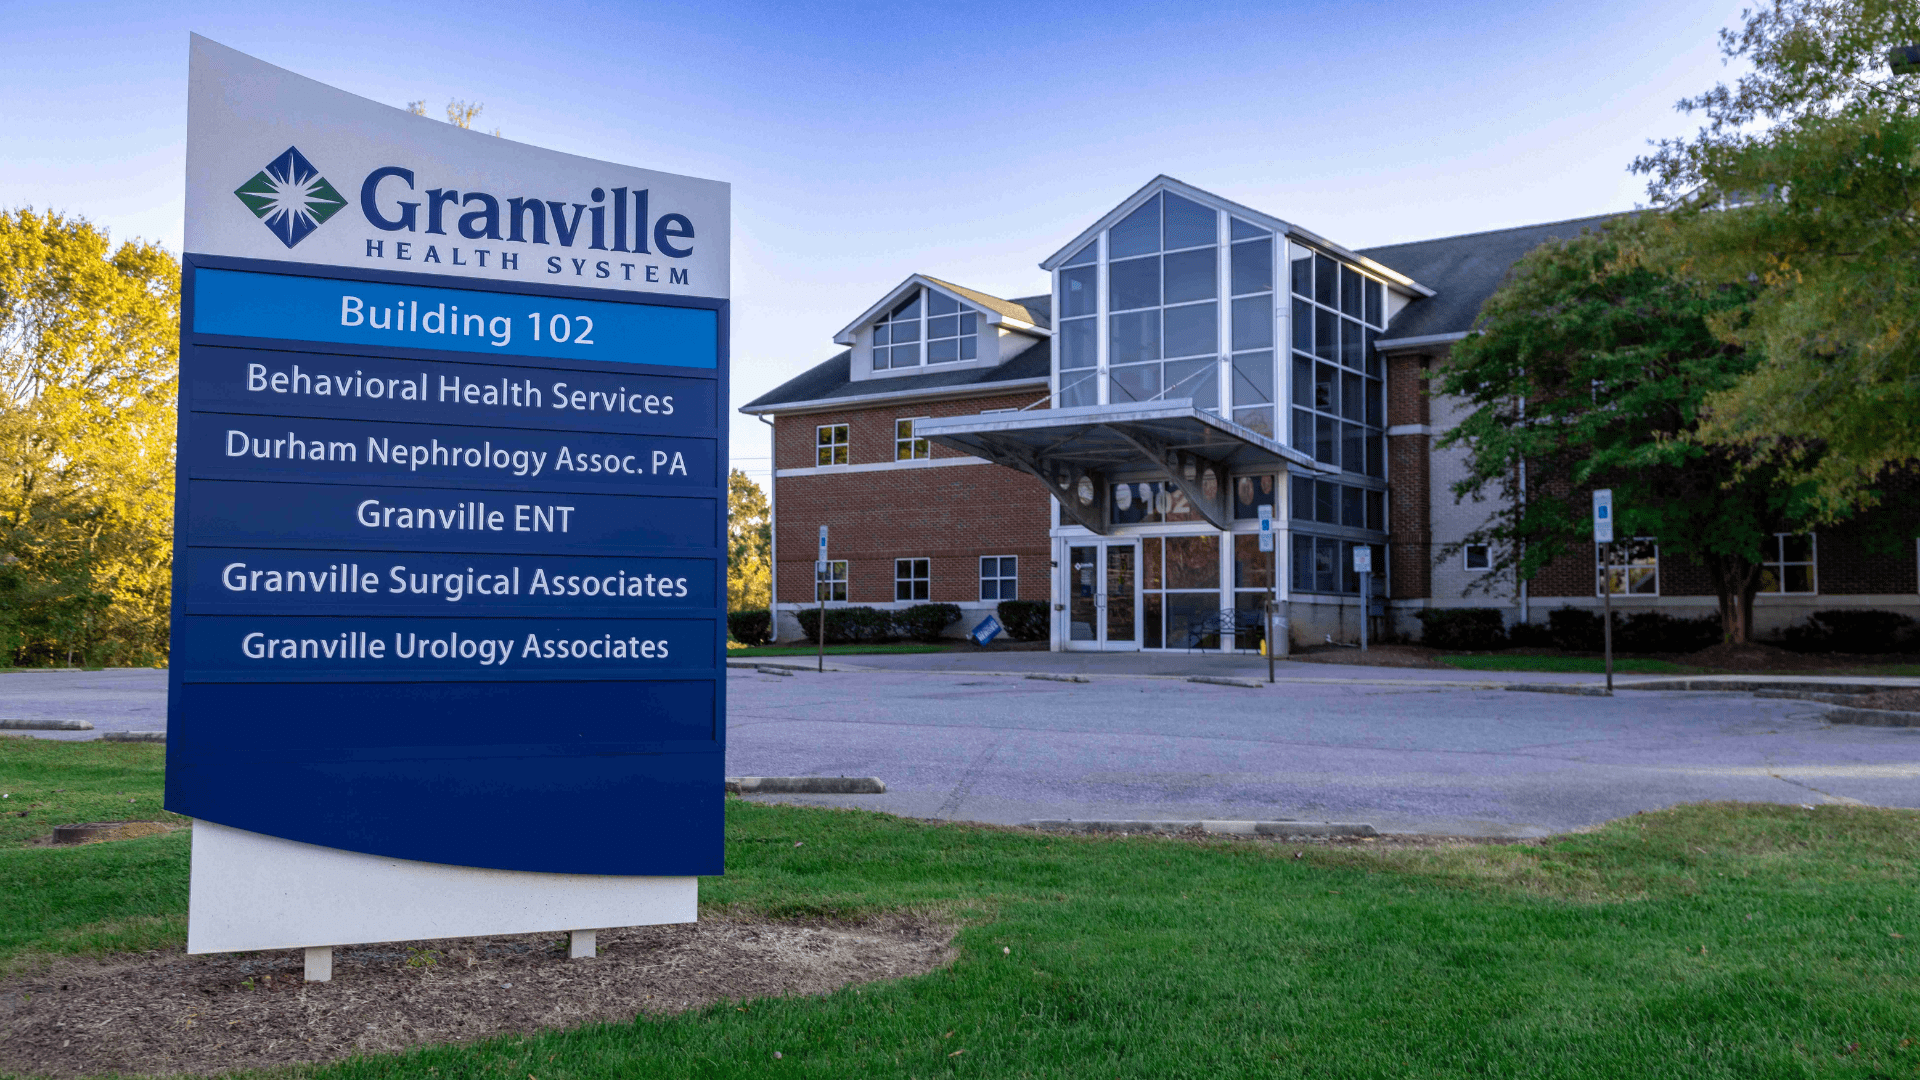 Front of Granville Behavioral Health building with a GHS sign that showcases the various specialties at the location, such as Granville ENT and Granville Surgical Associates.